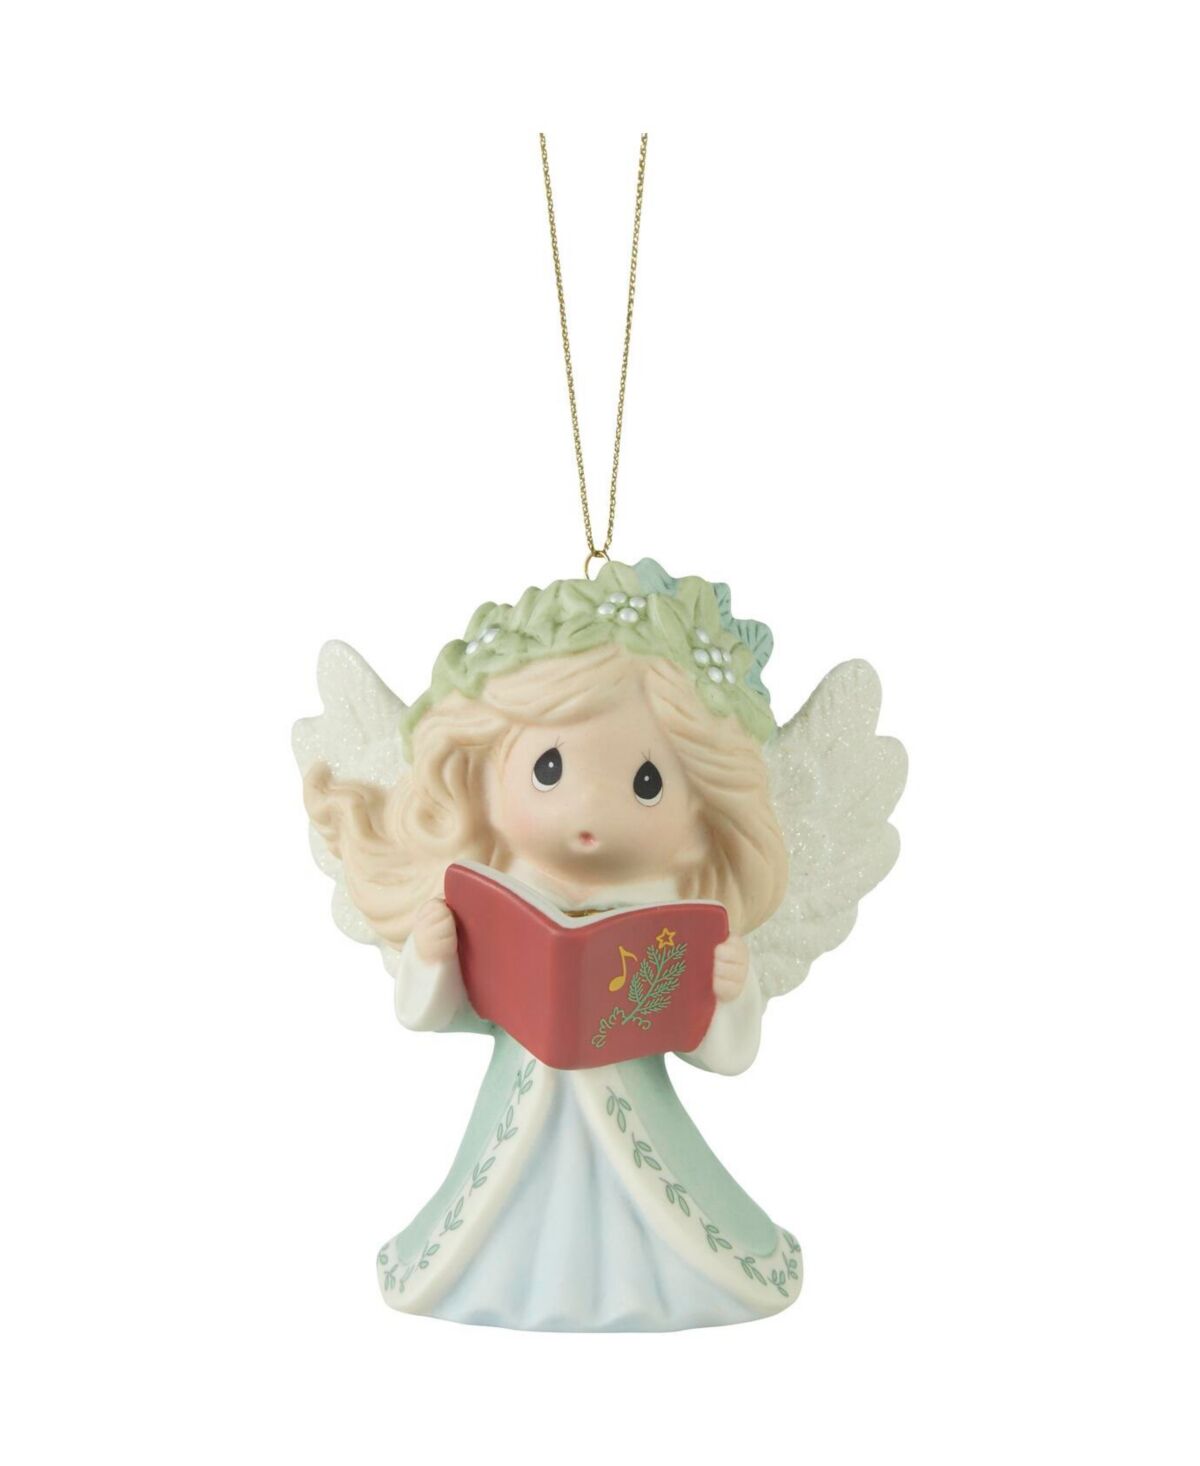 Precious Moments Wishing You Joyful Sounds of The Season Annual Angel Bisque Porcelain Ornament - Multicolored